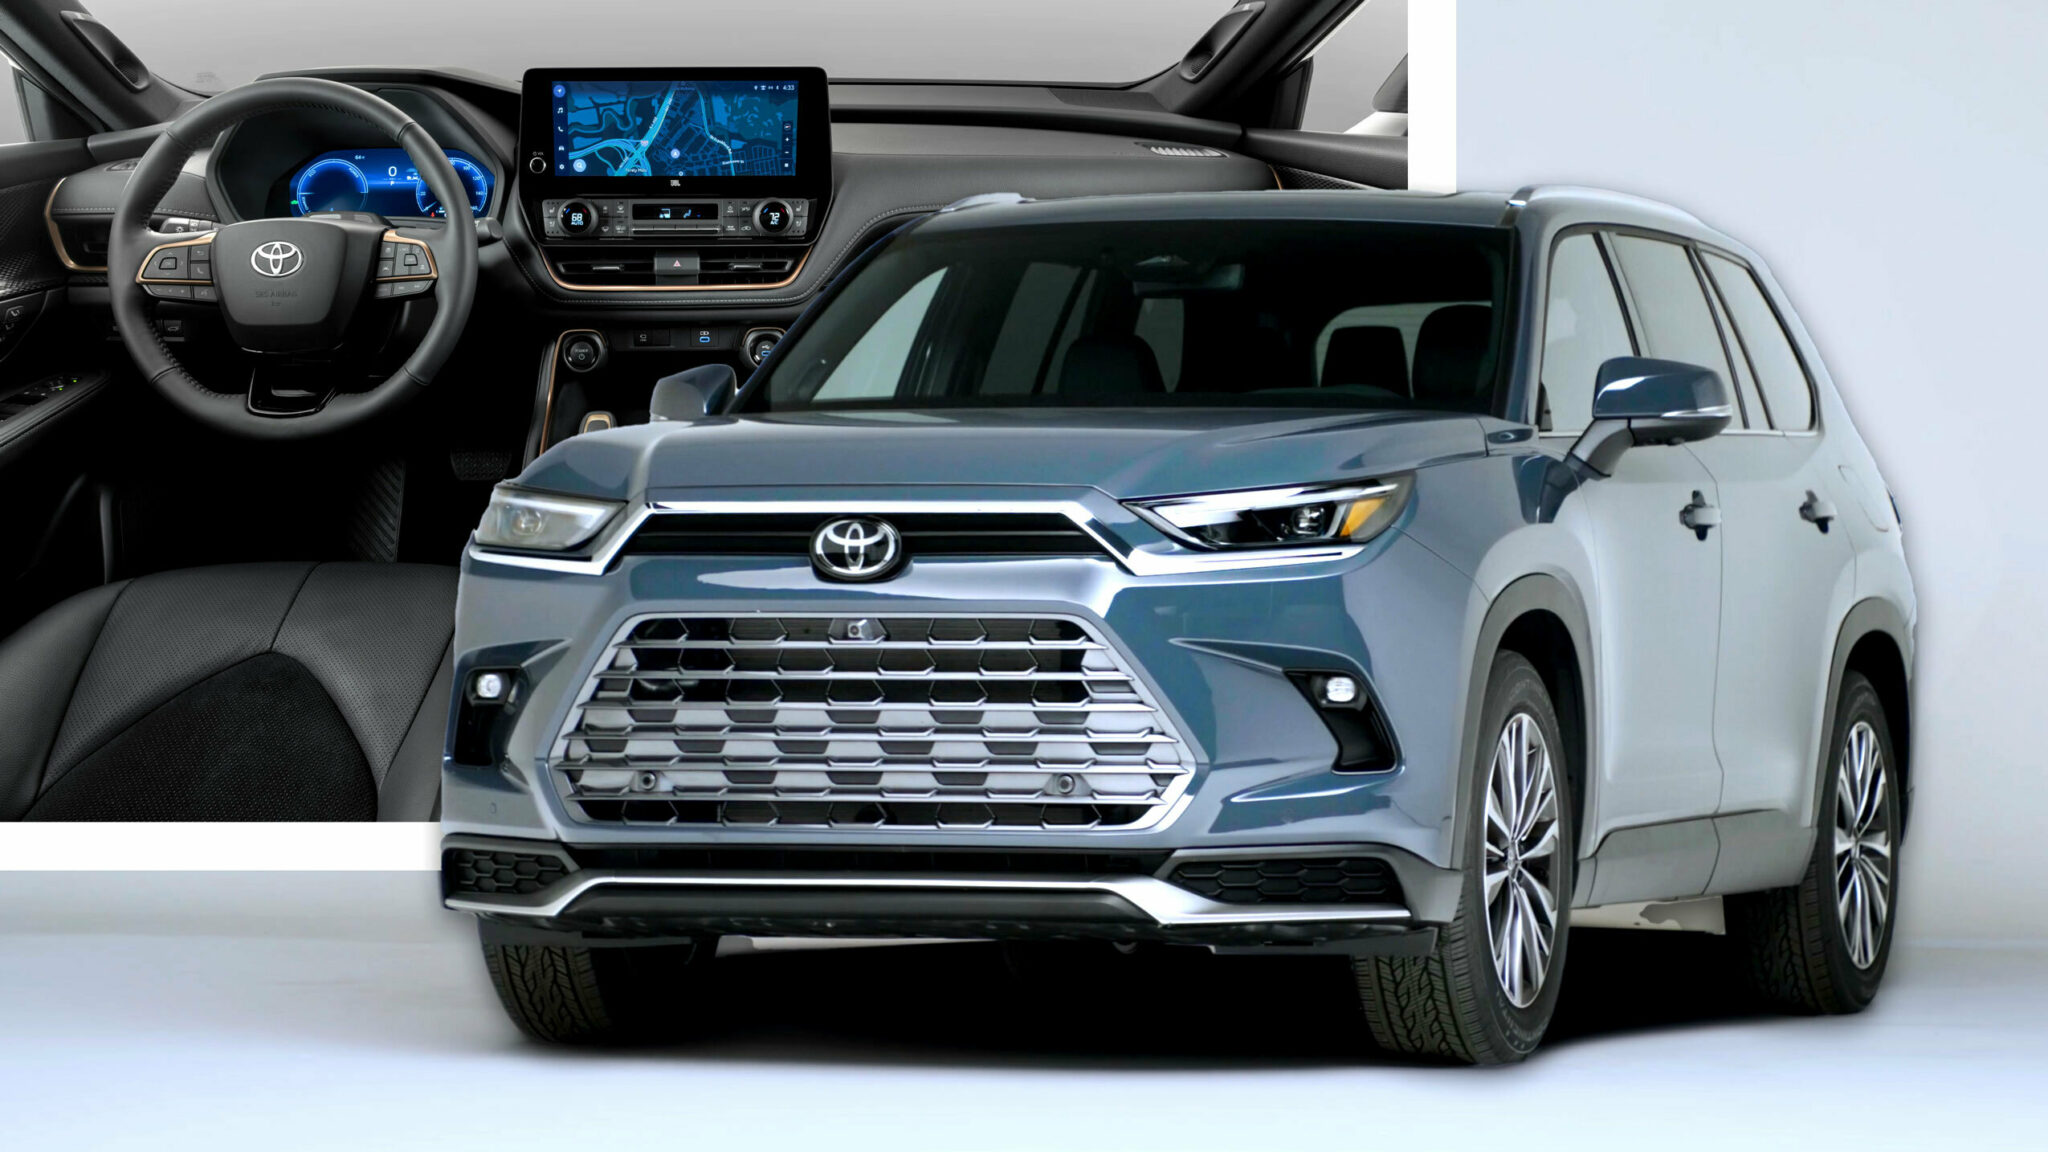 New 2024 Toyota Grand Highlander Has 13 Cupholders, 7 USB Ports, And Up